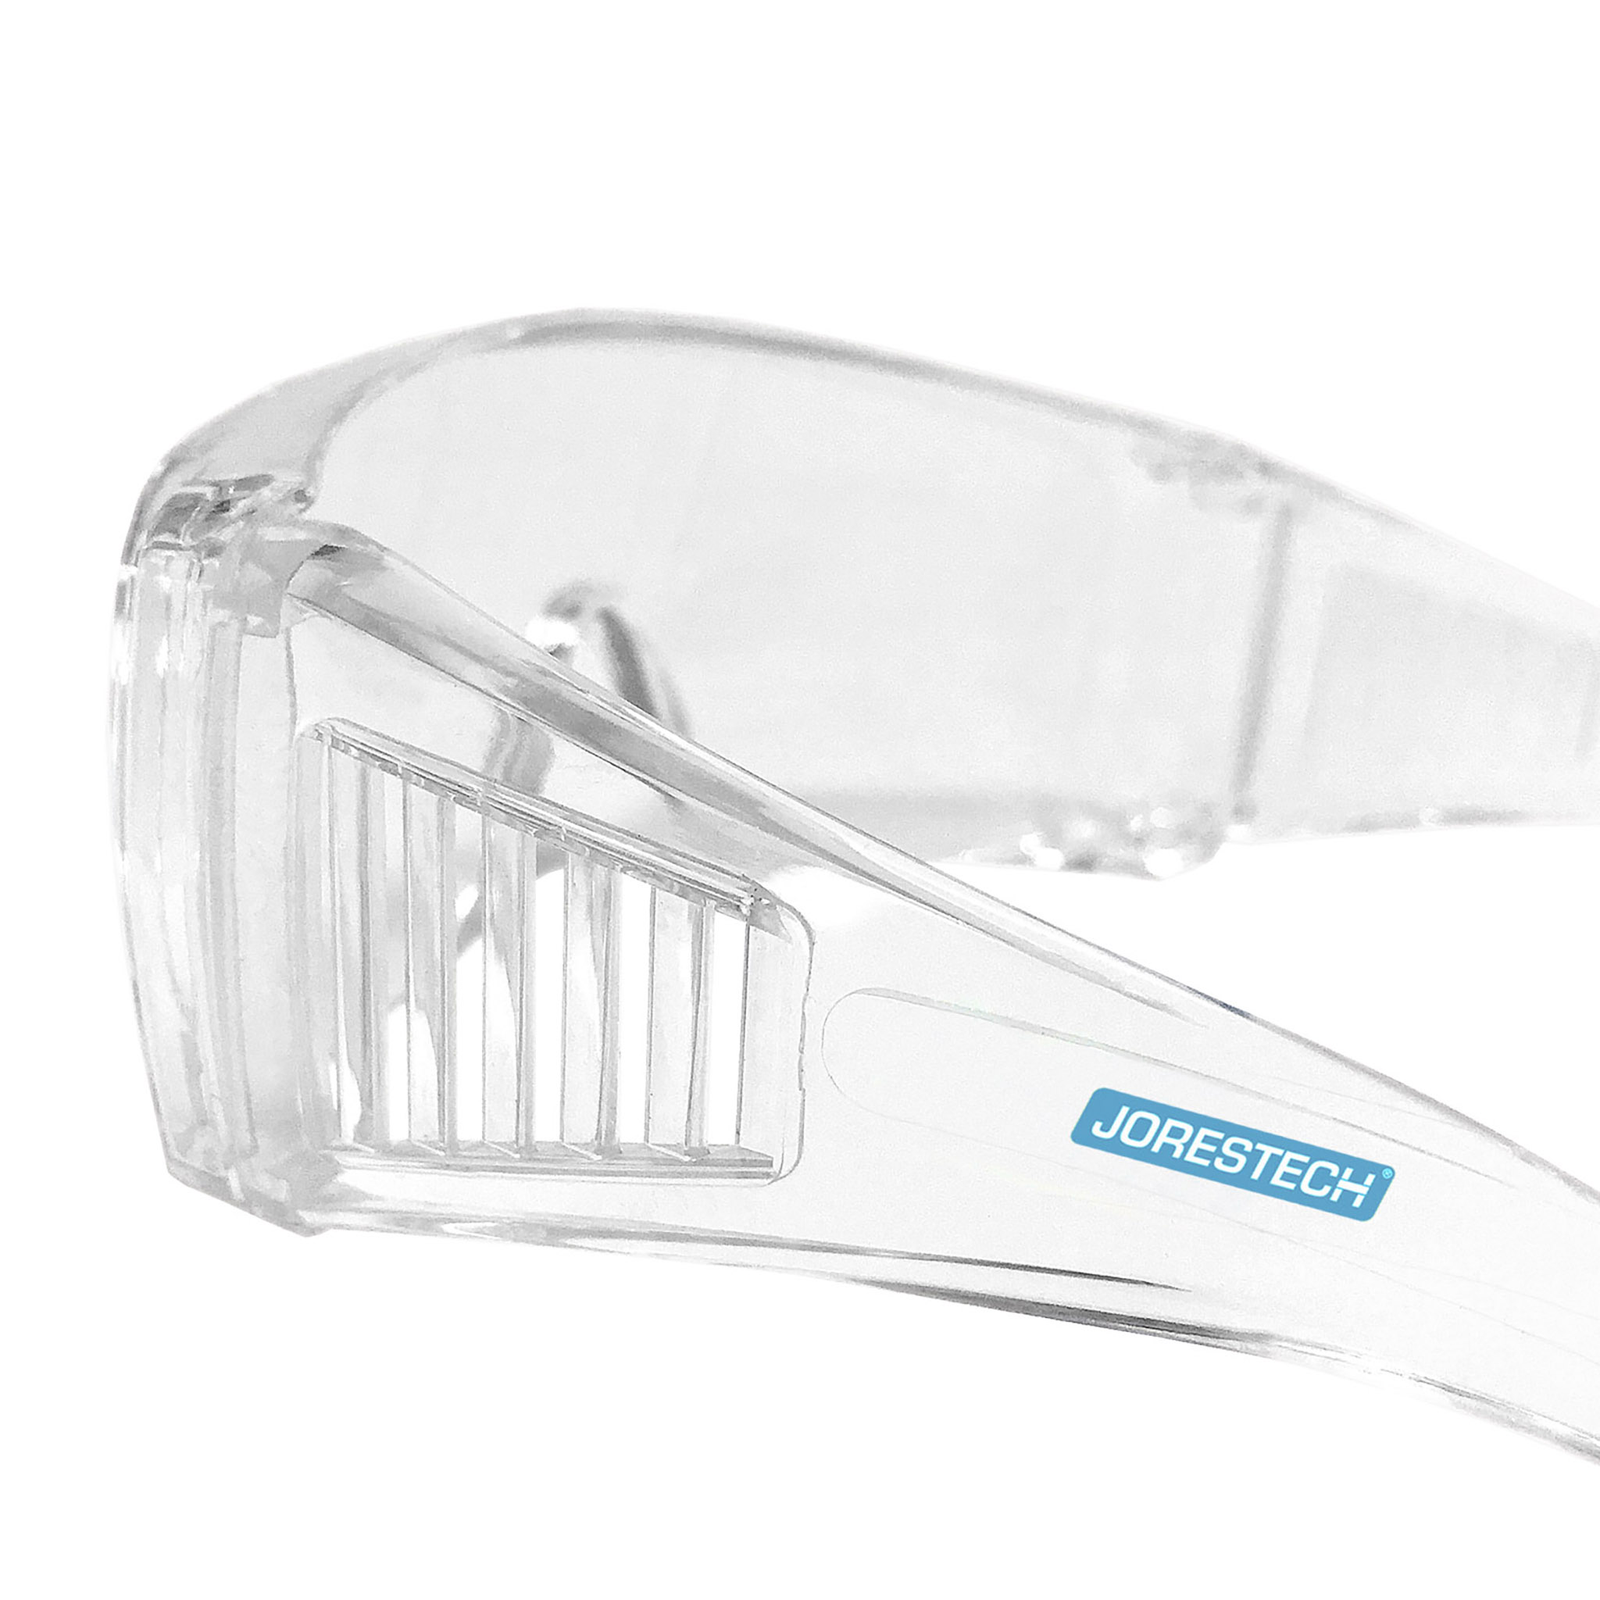 Side view of the clear Jorestech safety glasses for high impact protection